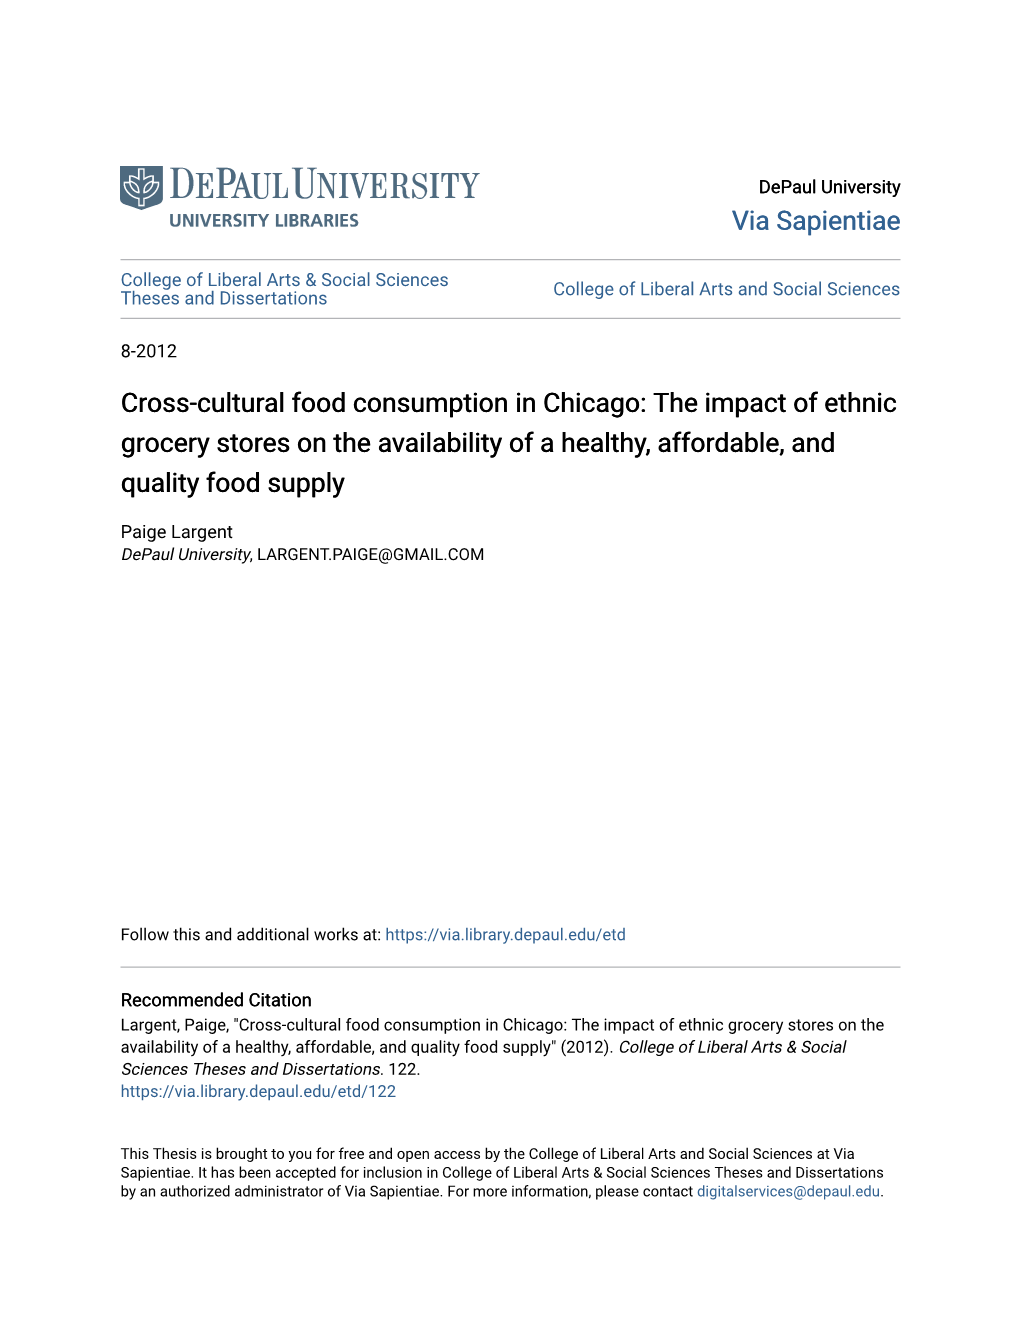 Cross-Cultural Food Consumption in Chicago: the Impact of Ethnic Grocery Stores on the Availability of a Healthy, Affordable, and Quality Food Supply